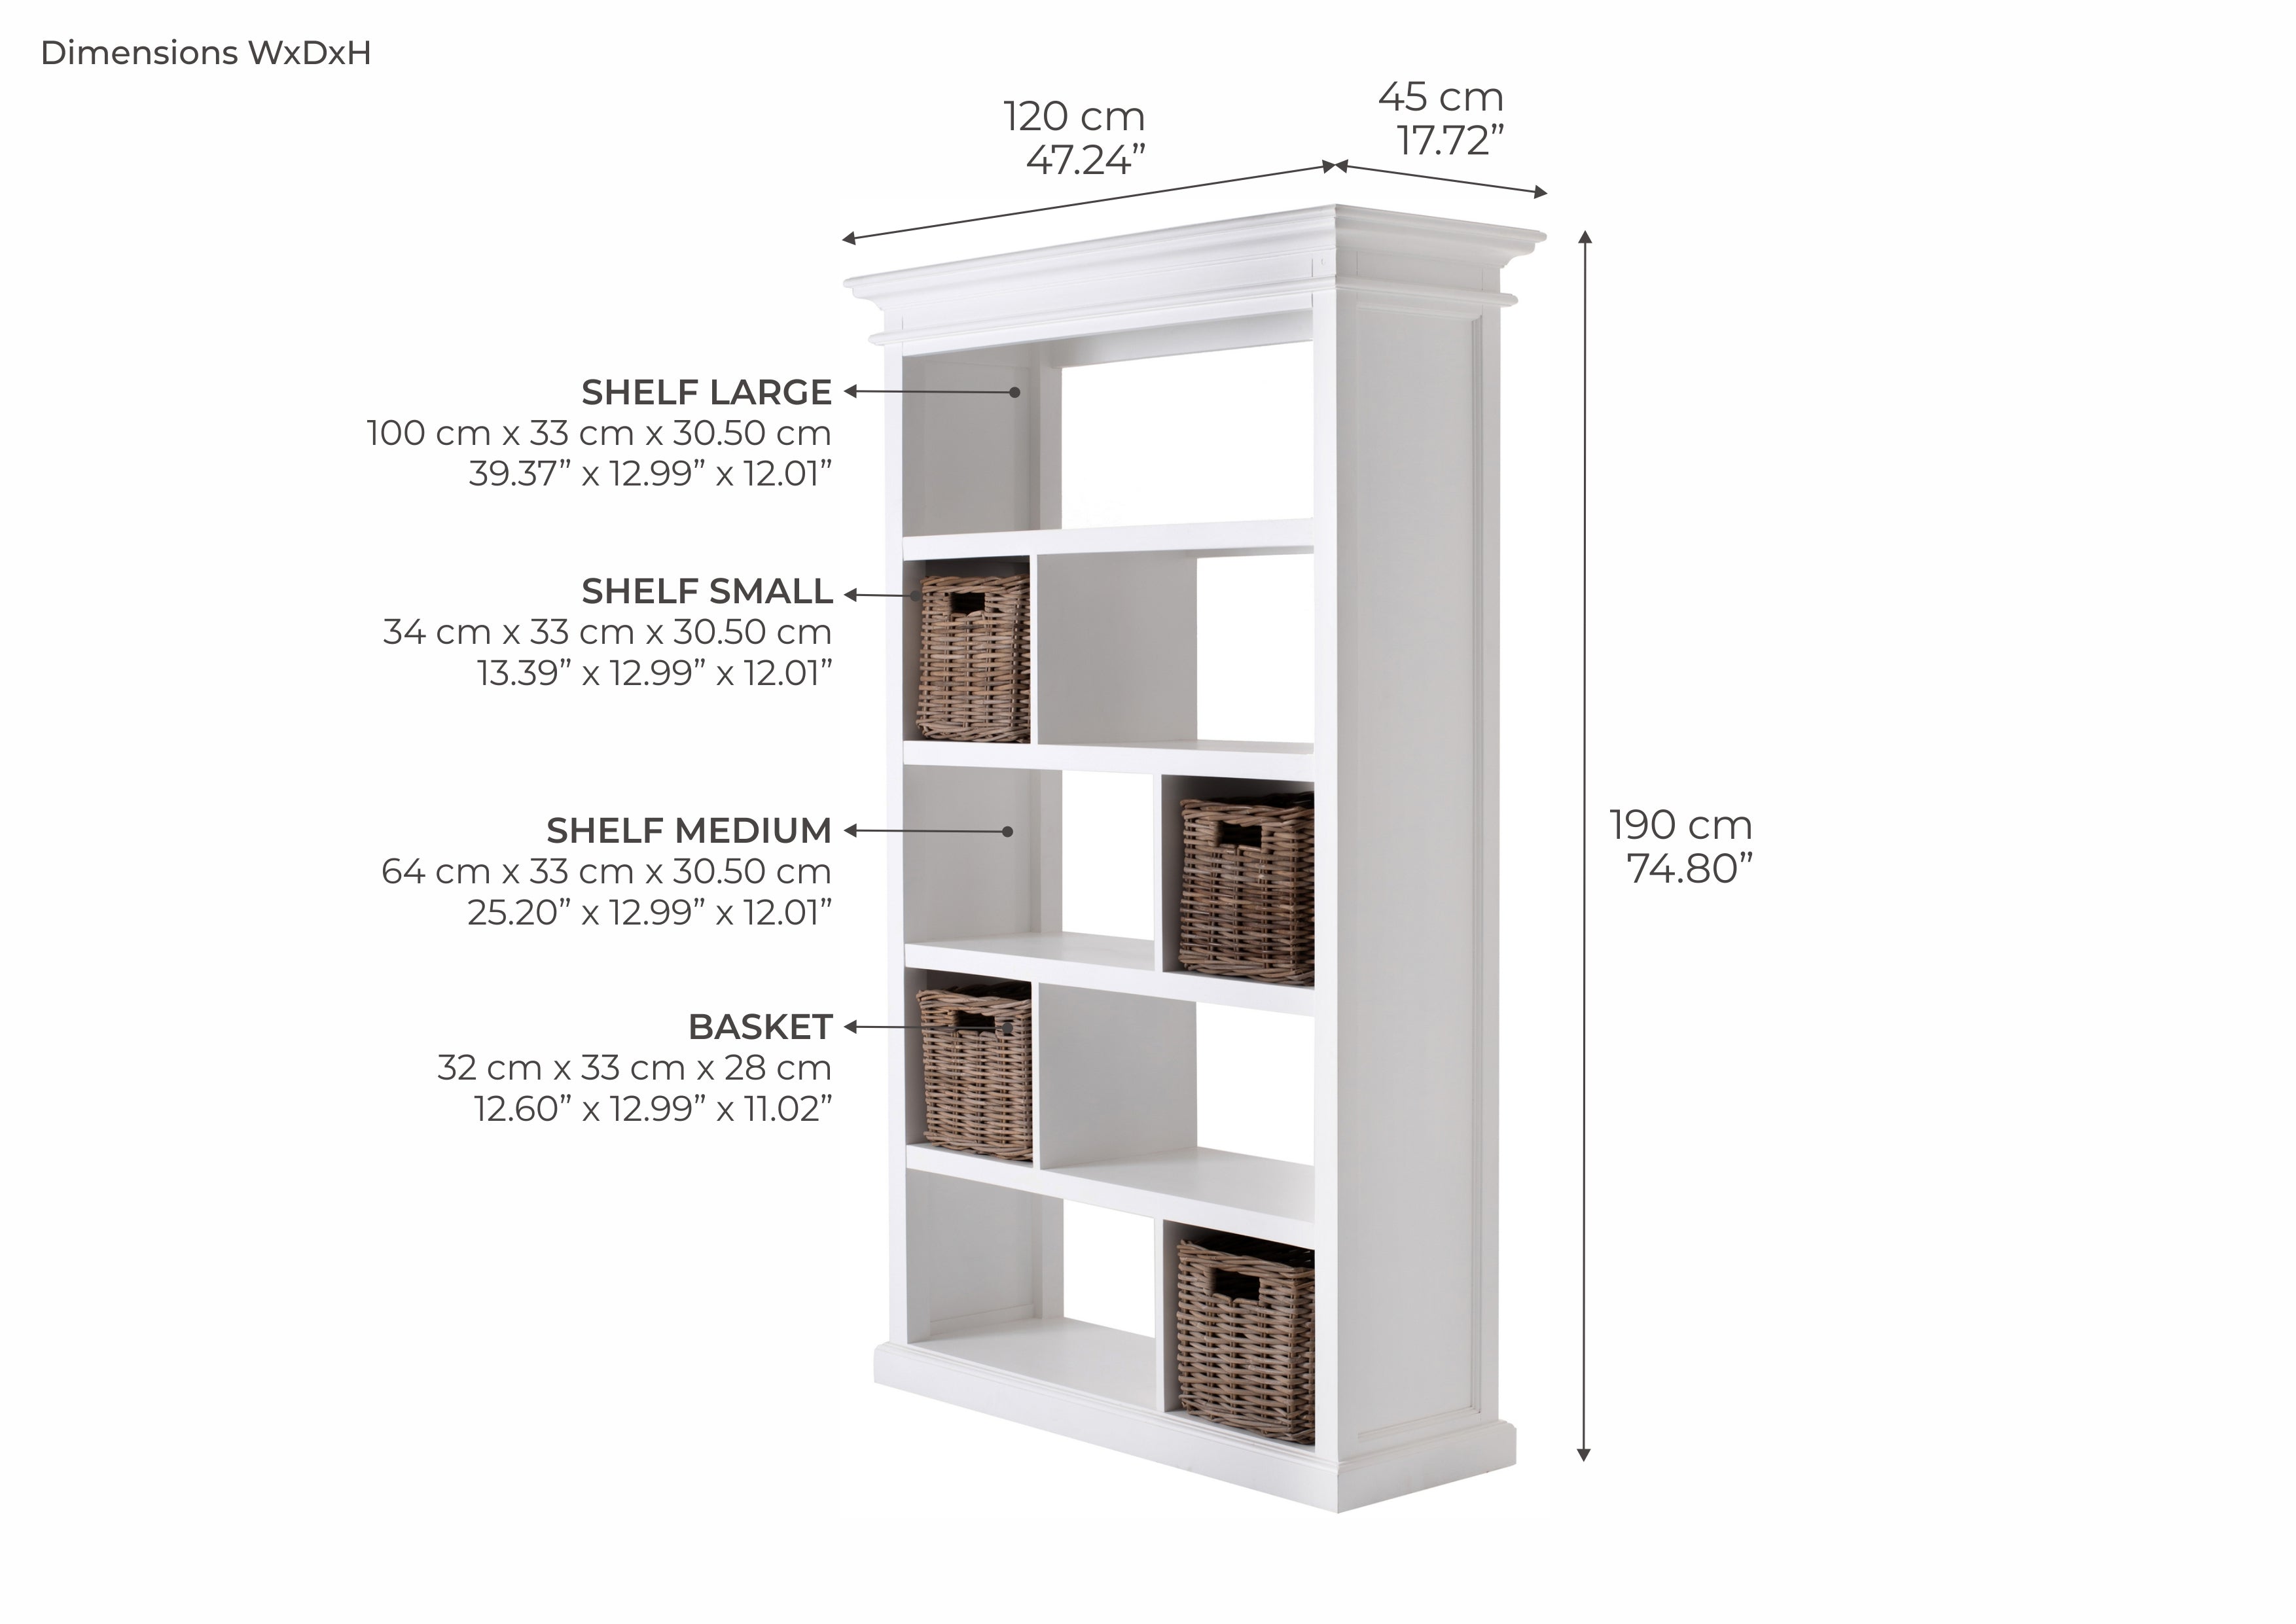 HALIFAX Large Cabinet Dimensions